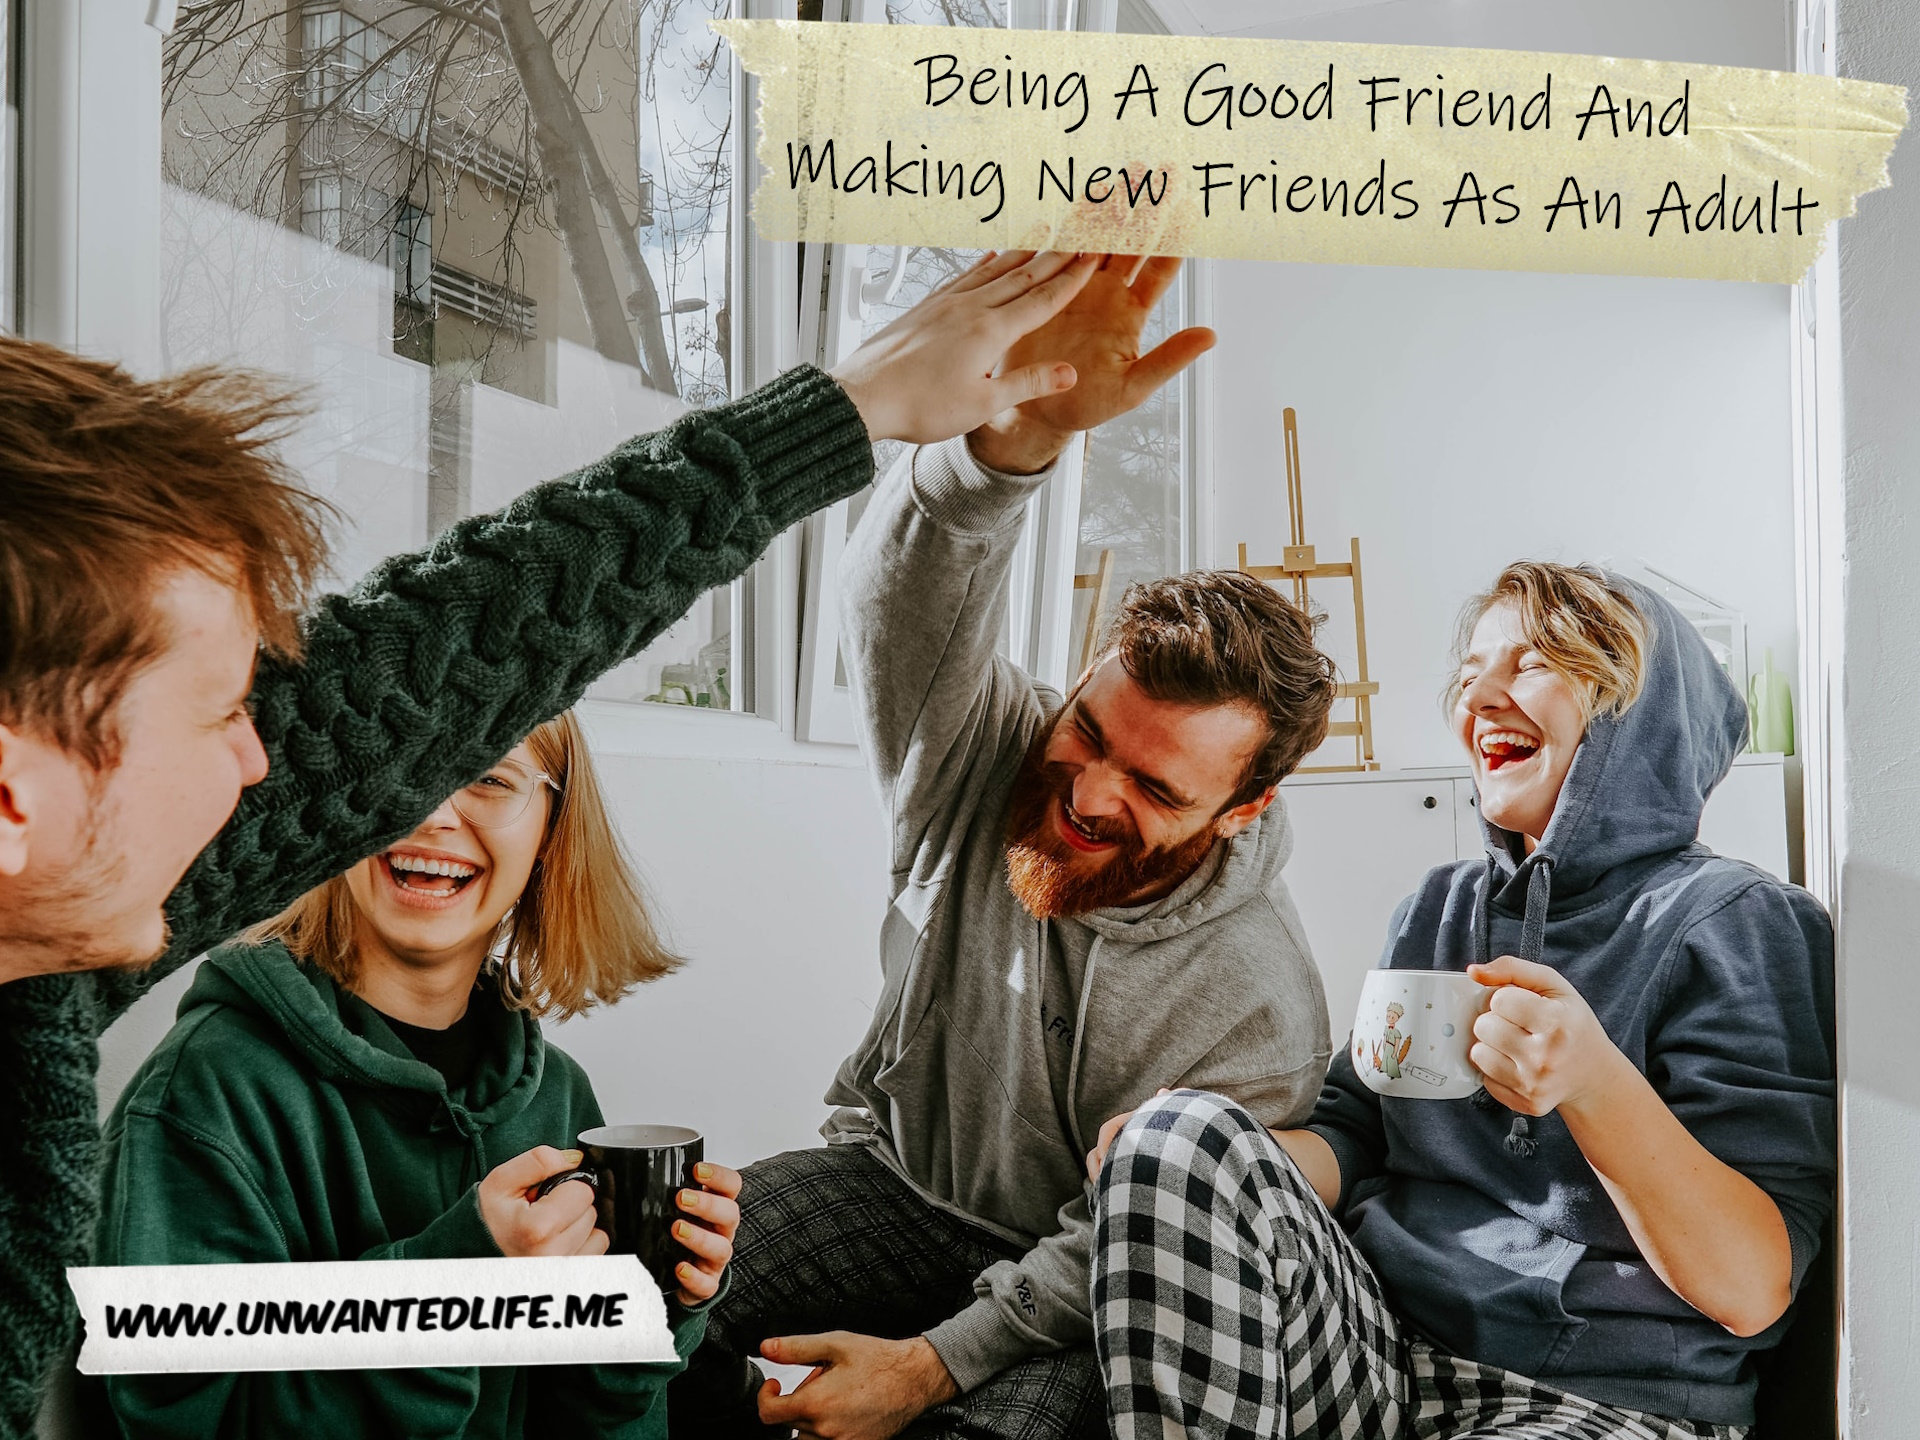 A group of White friends laughing and chat together in PJs to represent the topic of the article - Being A Good Friend And Making New Friends As An Adult